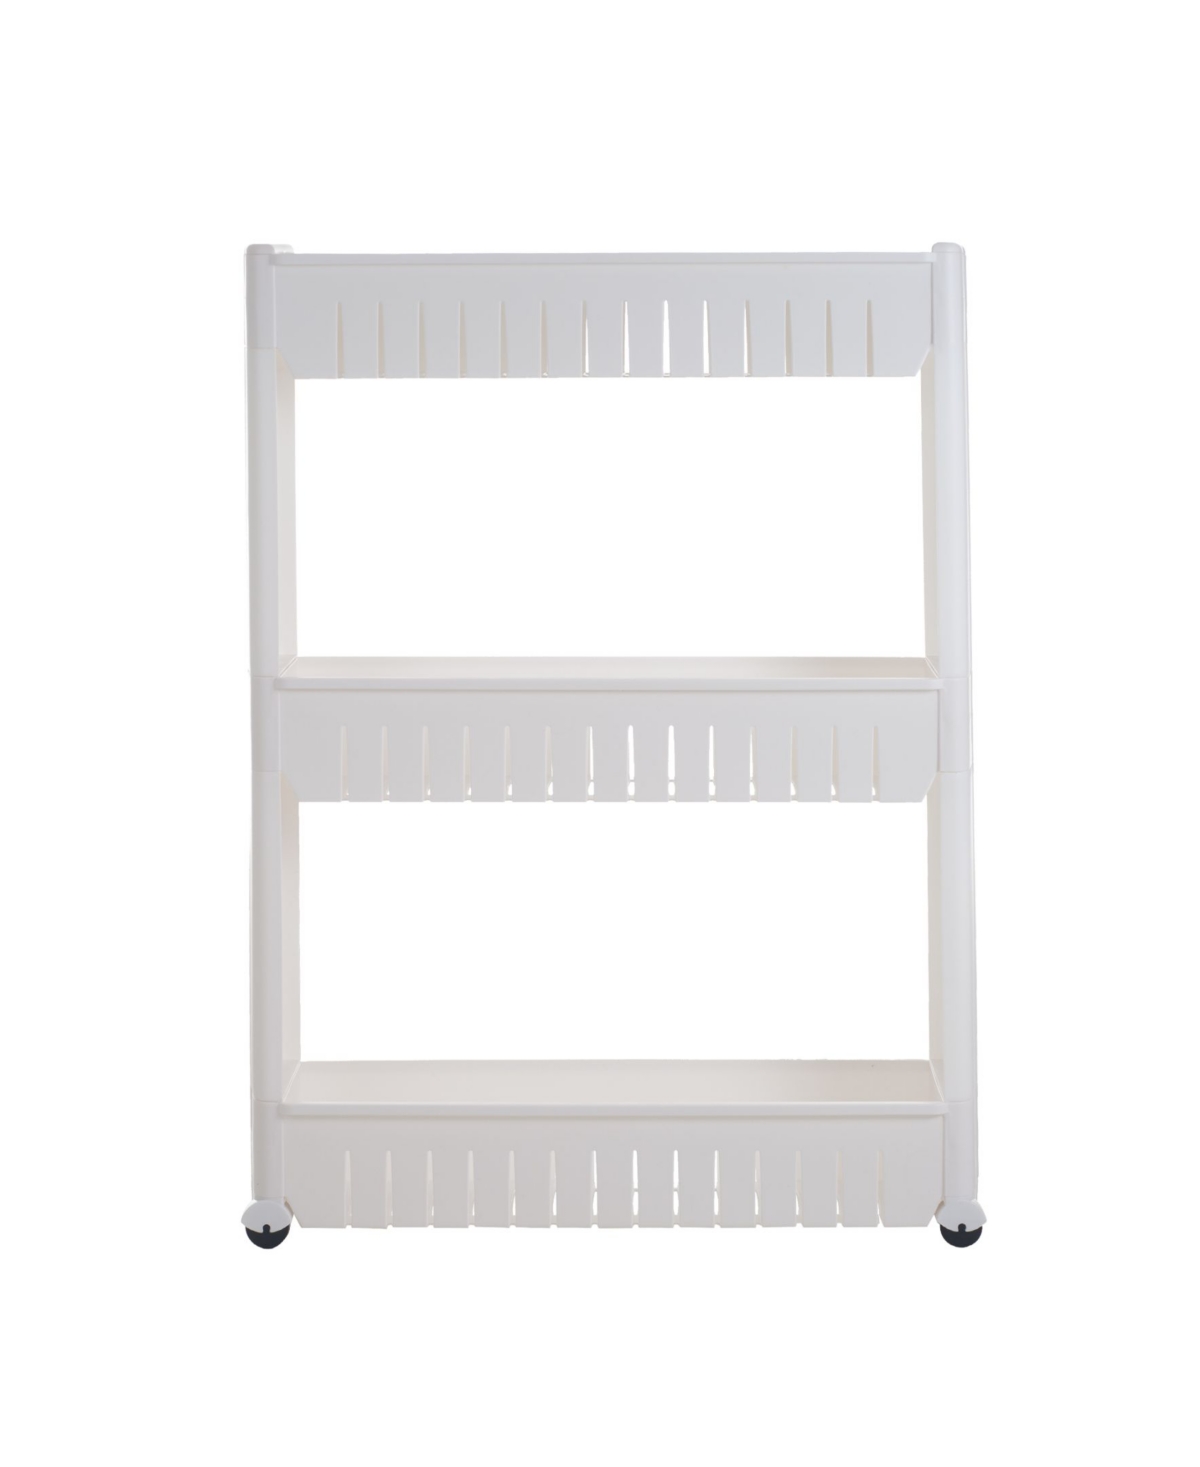 Mobile Shelving Unit organizer with 3 Large Storage Baskets by Everyday Home - White